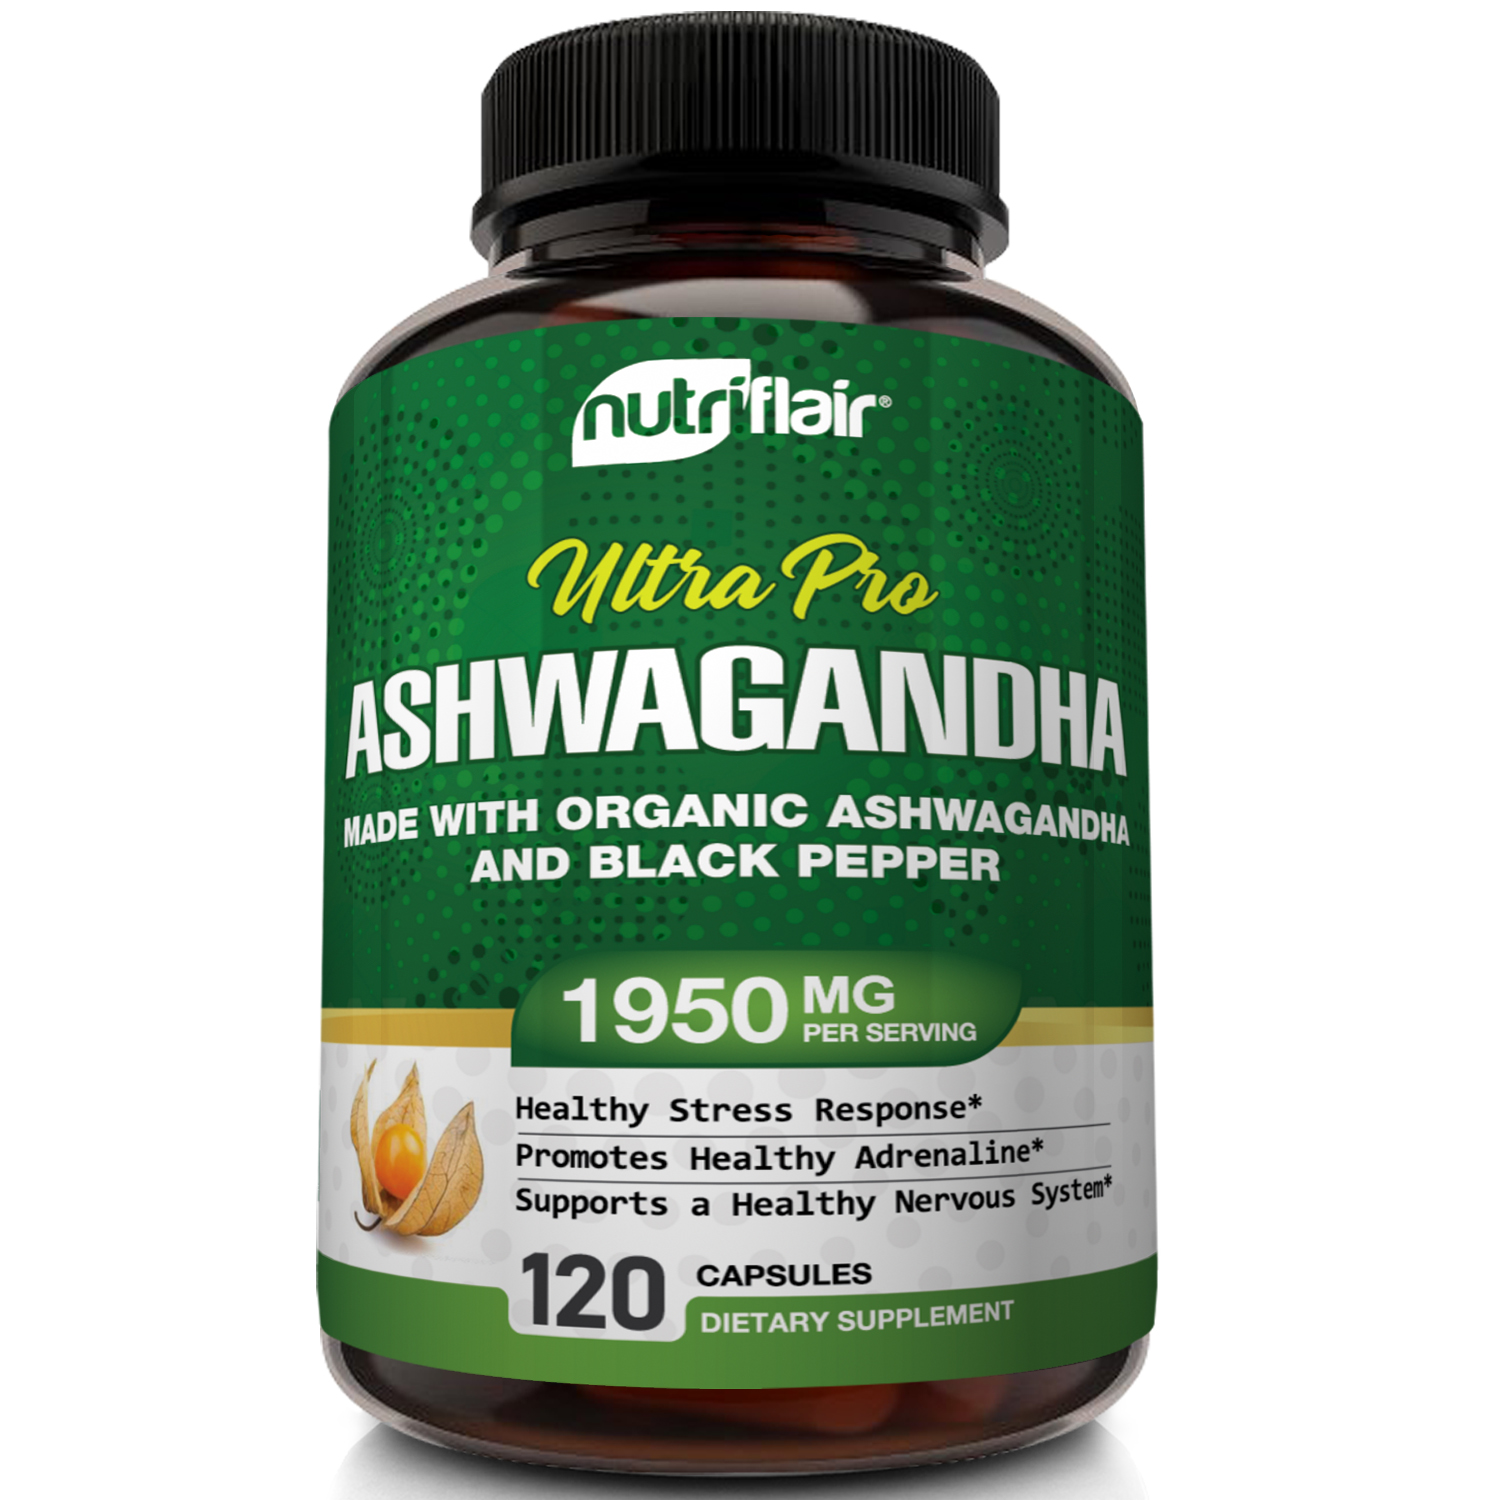 NutriFlair Certified Organic Ashwagandha Capsules for Natural Anxiety and Stress Relief Dietary Supplements 120 Capsules - image 4 of 7